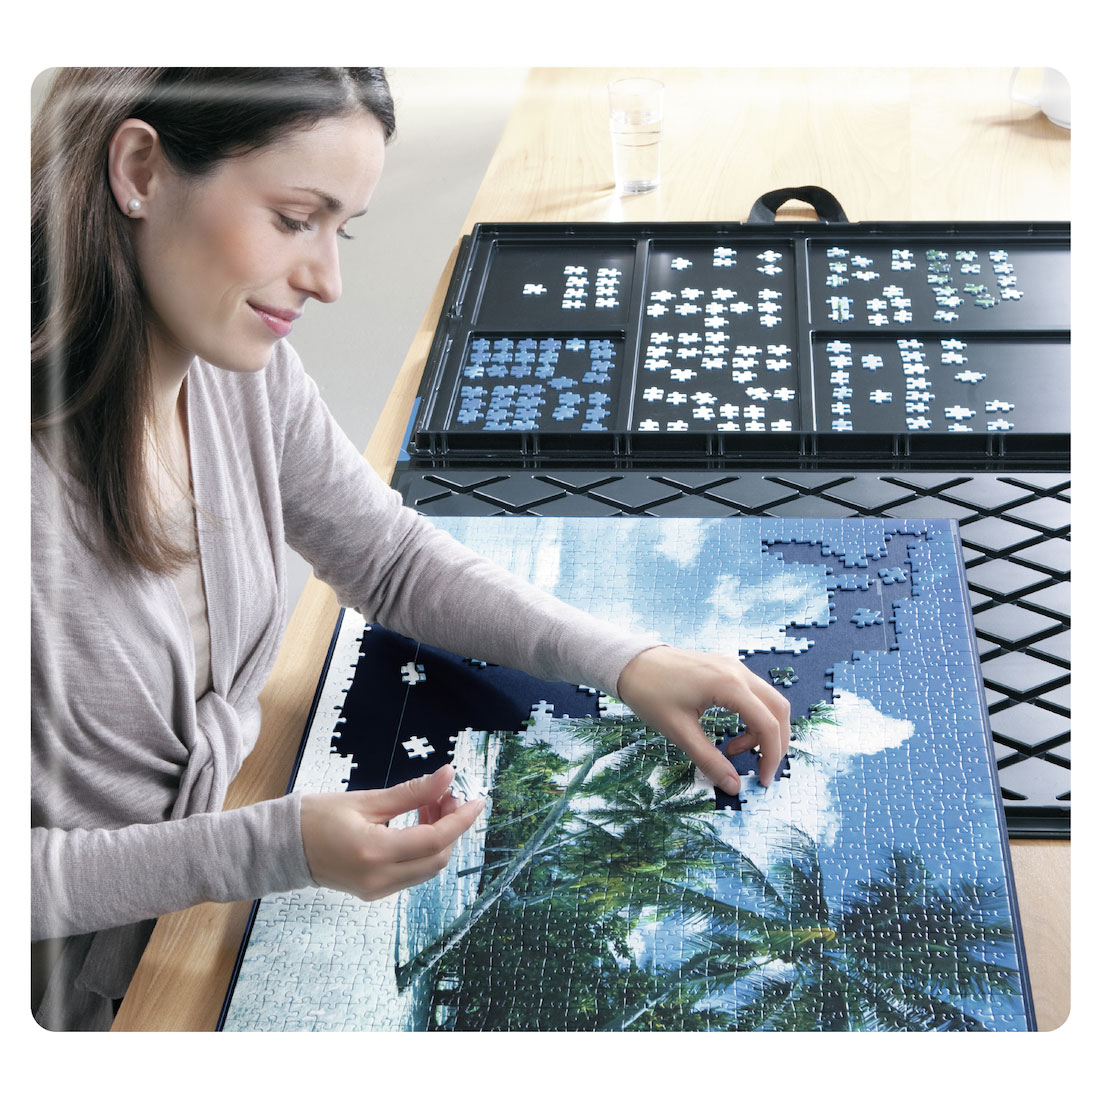 PUZZLE STORAGE FOLDER Keeper for Jigsaw Enthusiasts Puzzle Space-Saving  $82.21 - PicClick